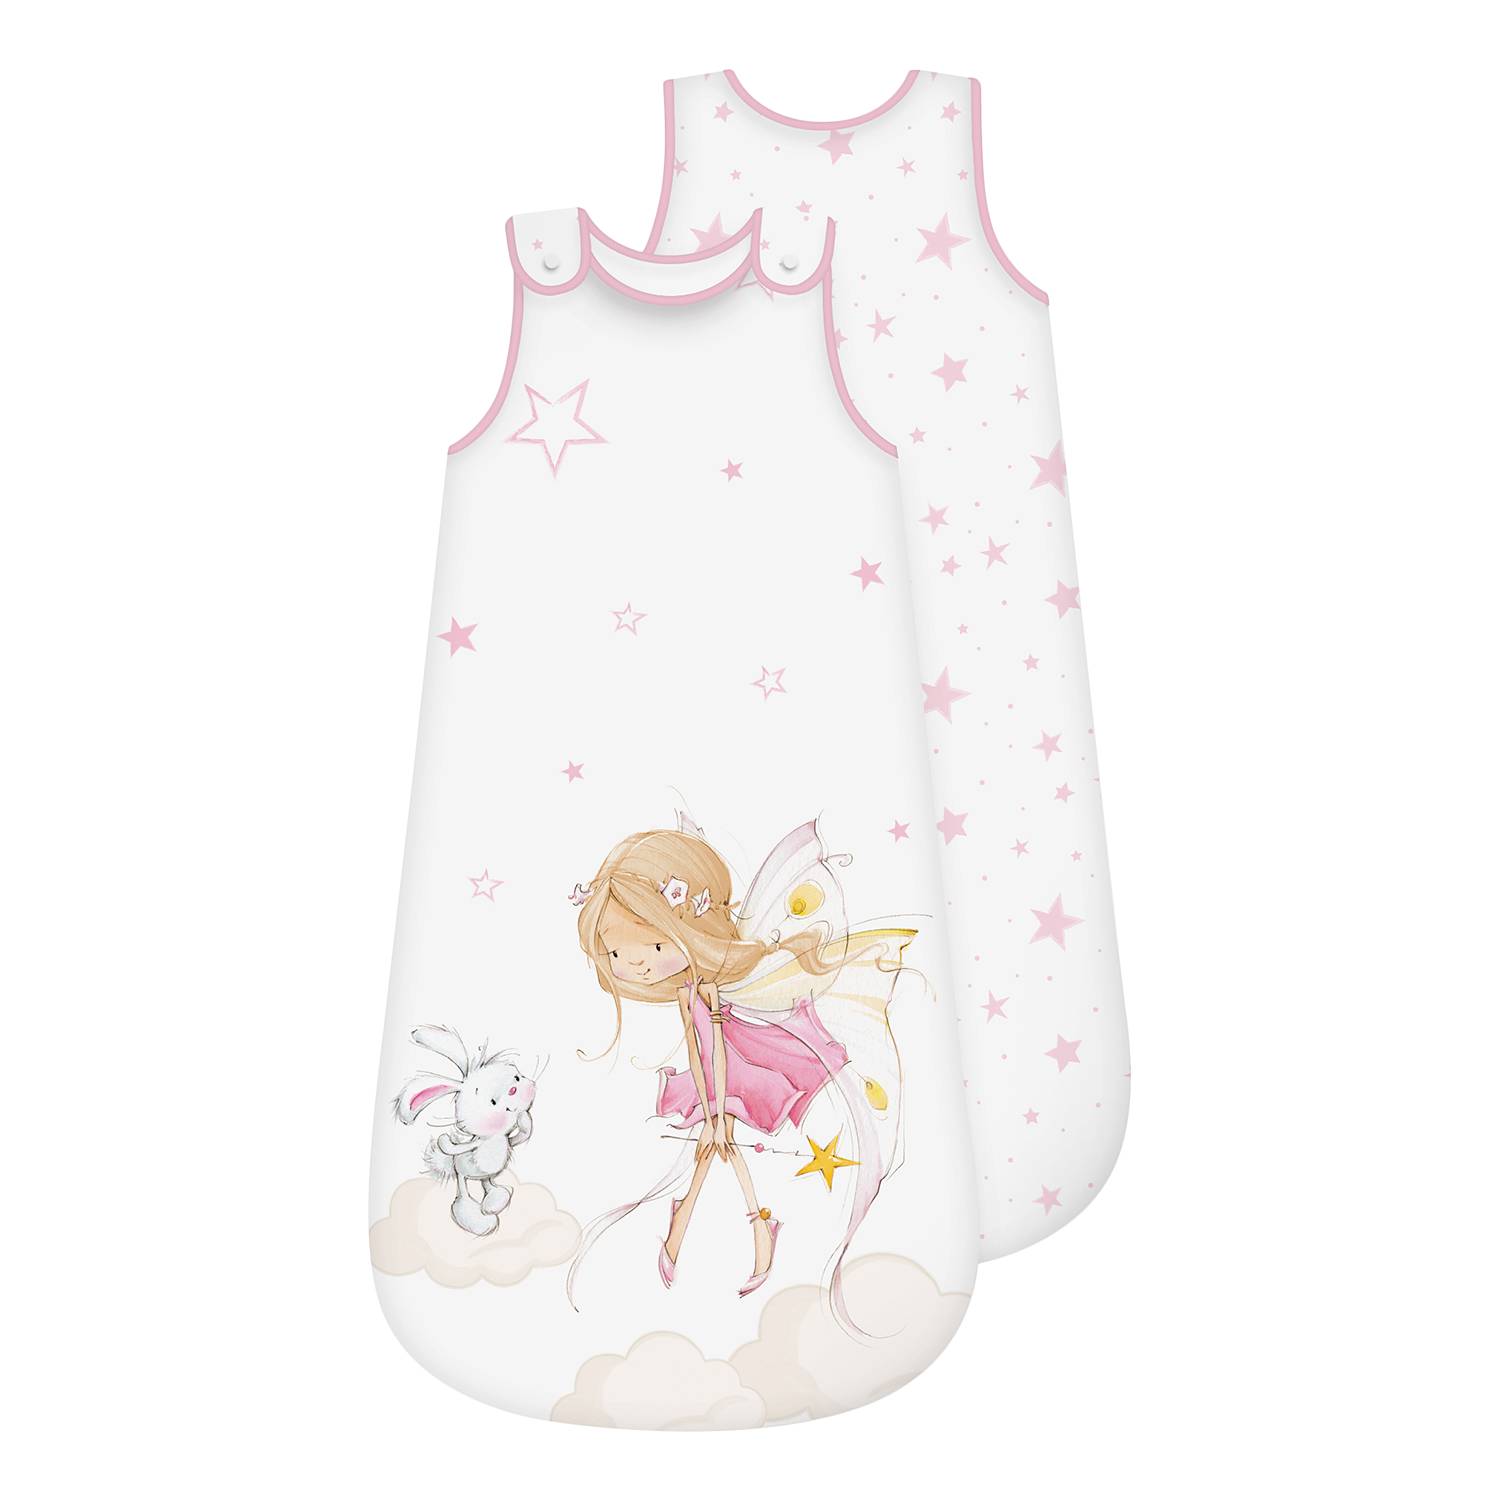 Image of Gigoteuse Jersey Little Fairy 000000001000244990